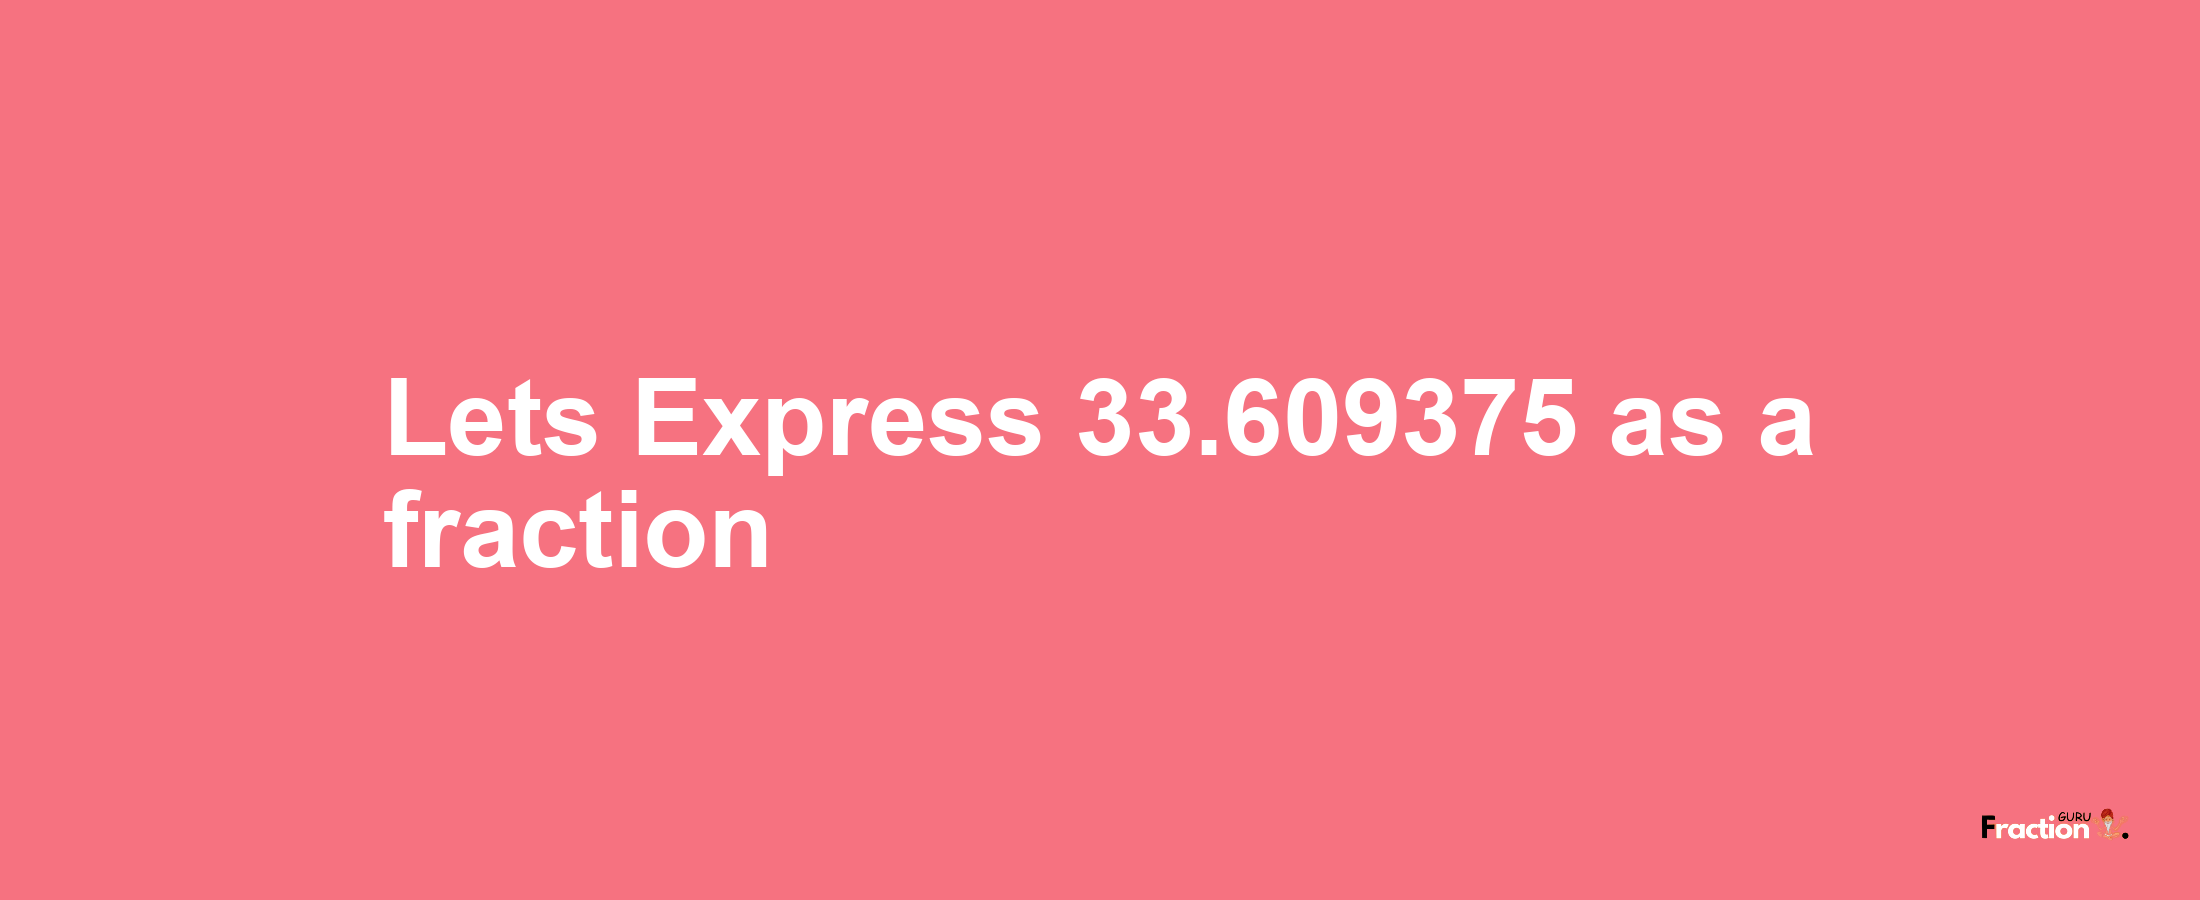 Lets Express 33.609375 as afraction